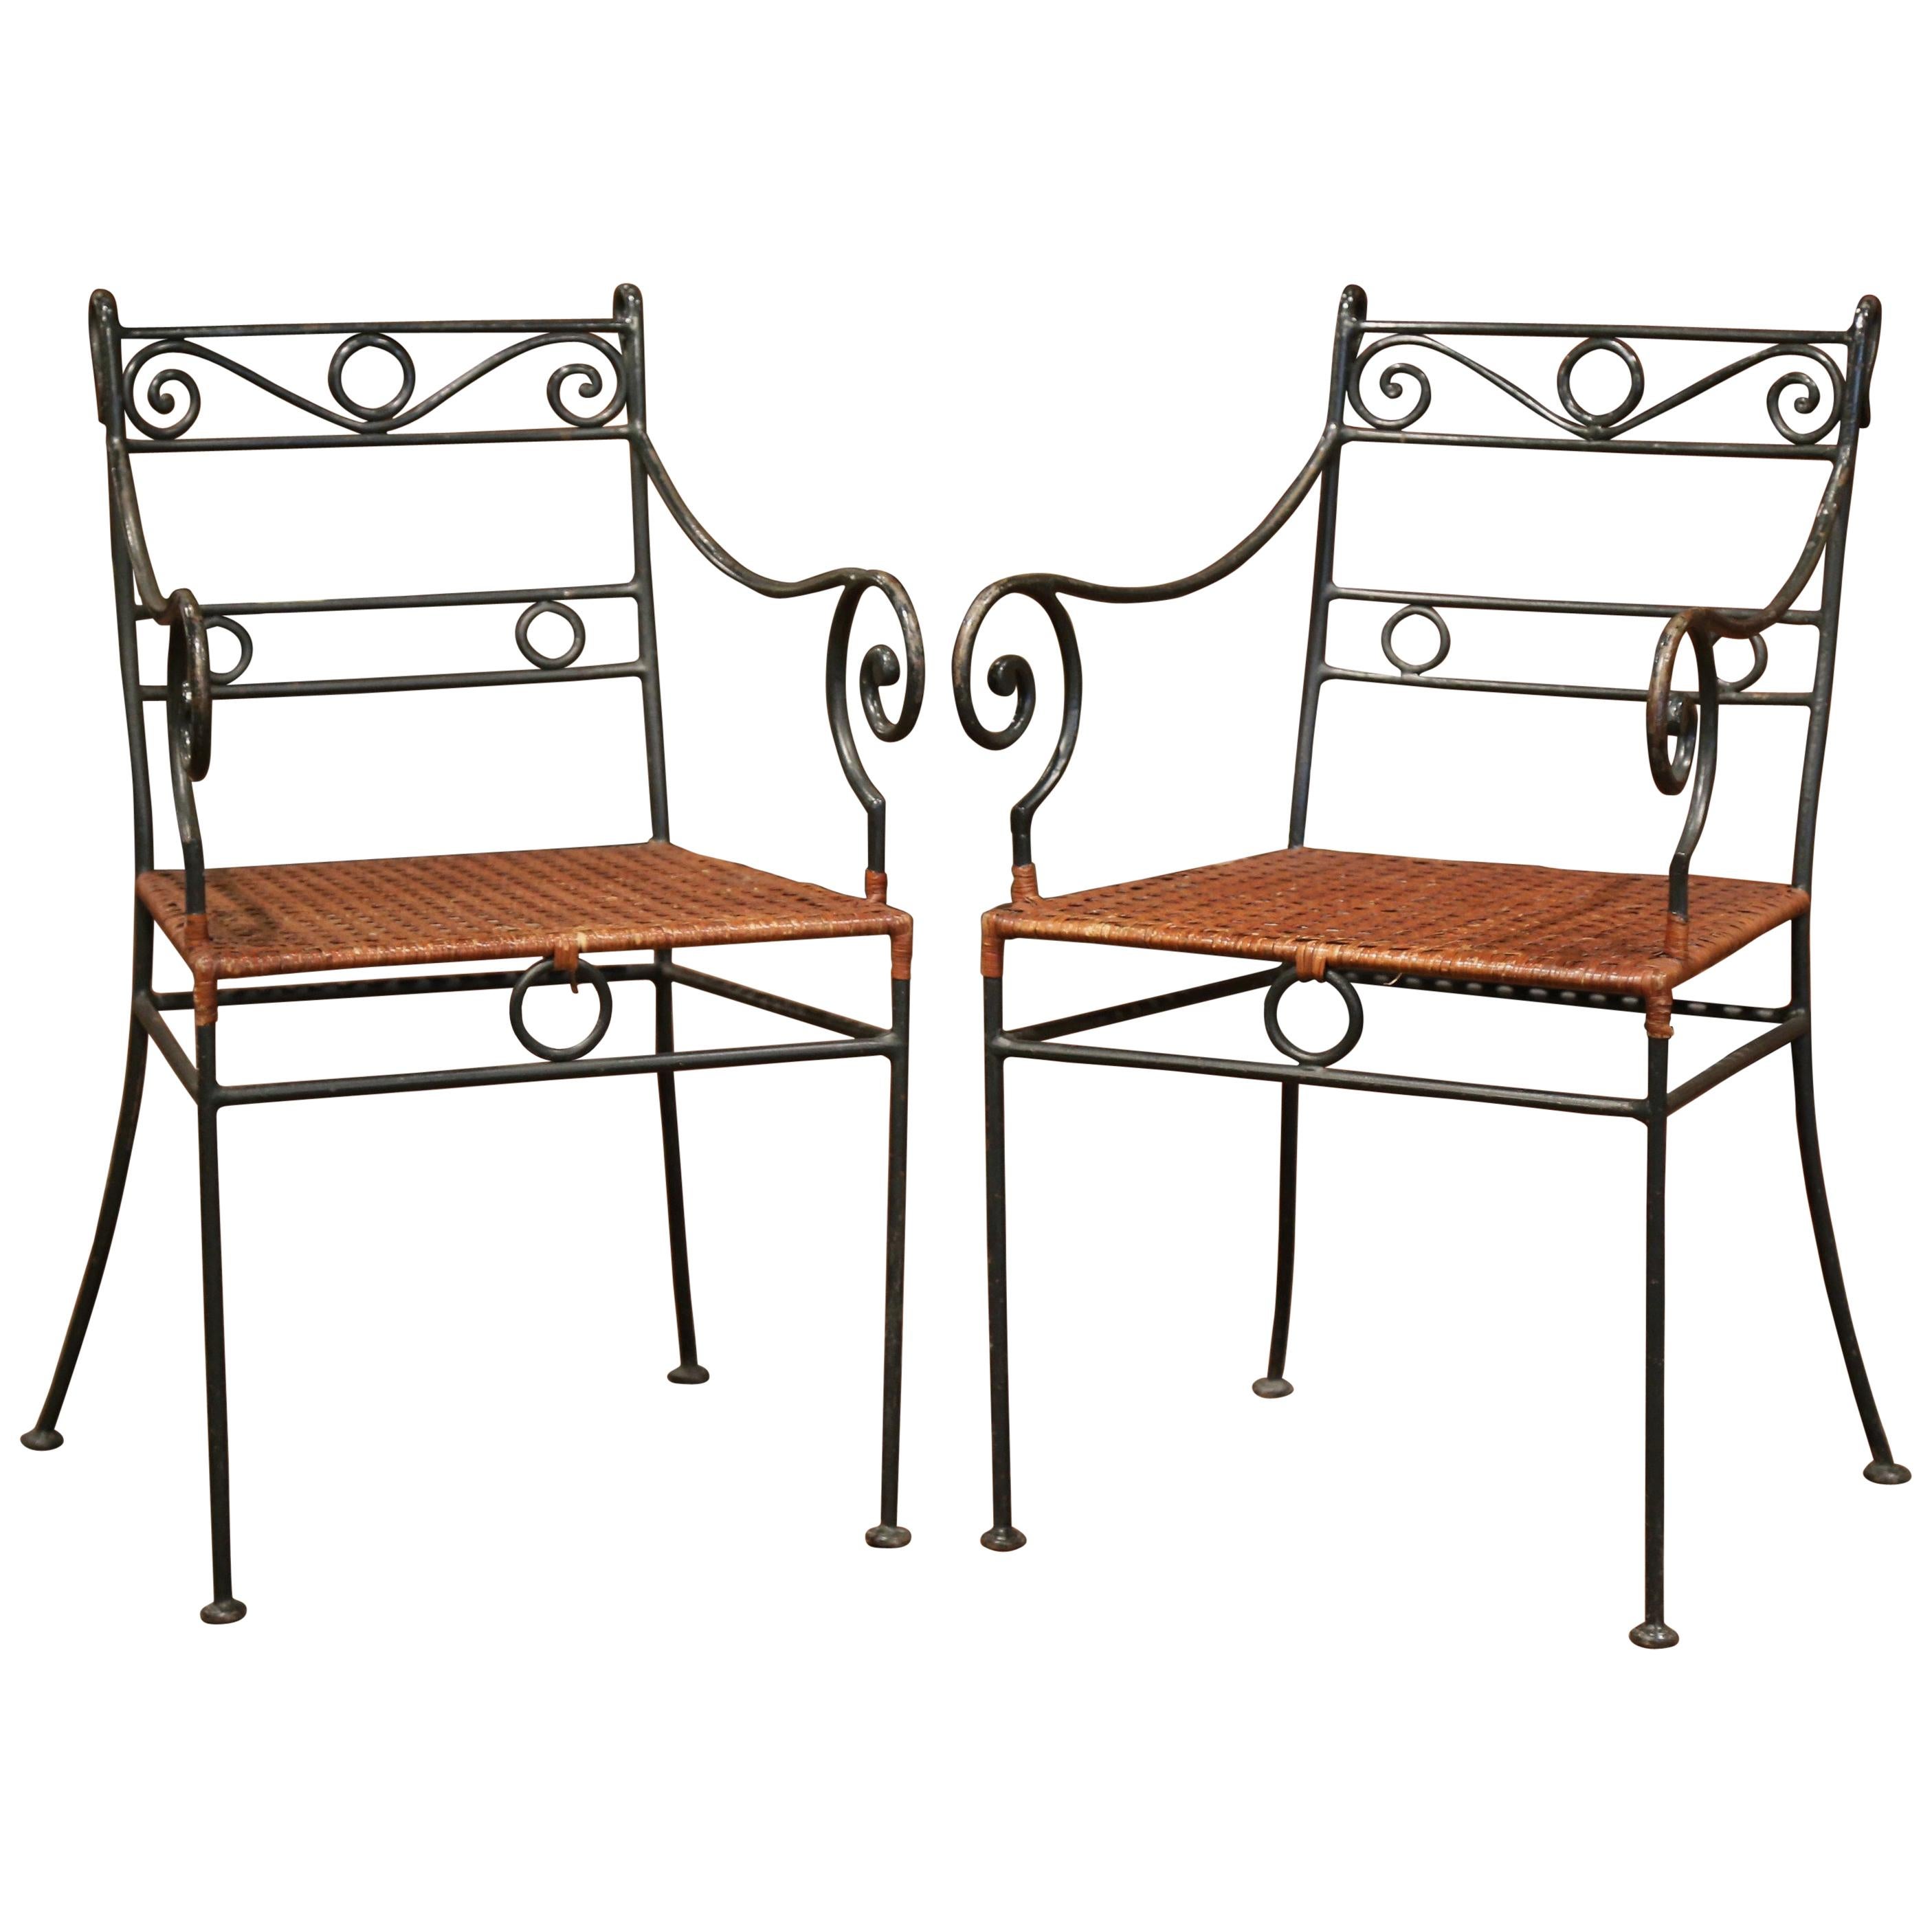 Pair of Midcentury French Painted Iron Outdoor Armchairs with Straw Seat